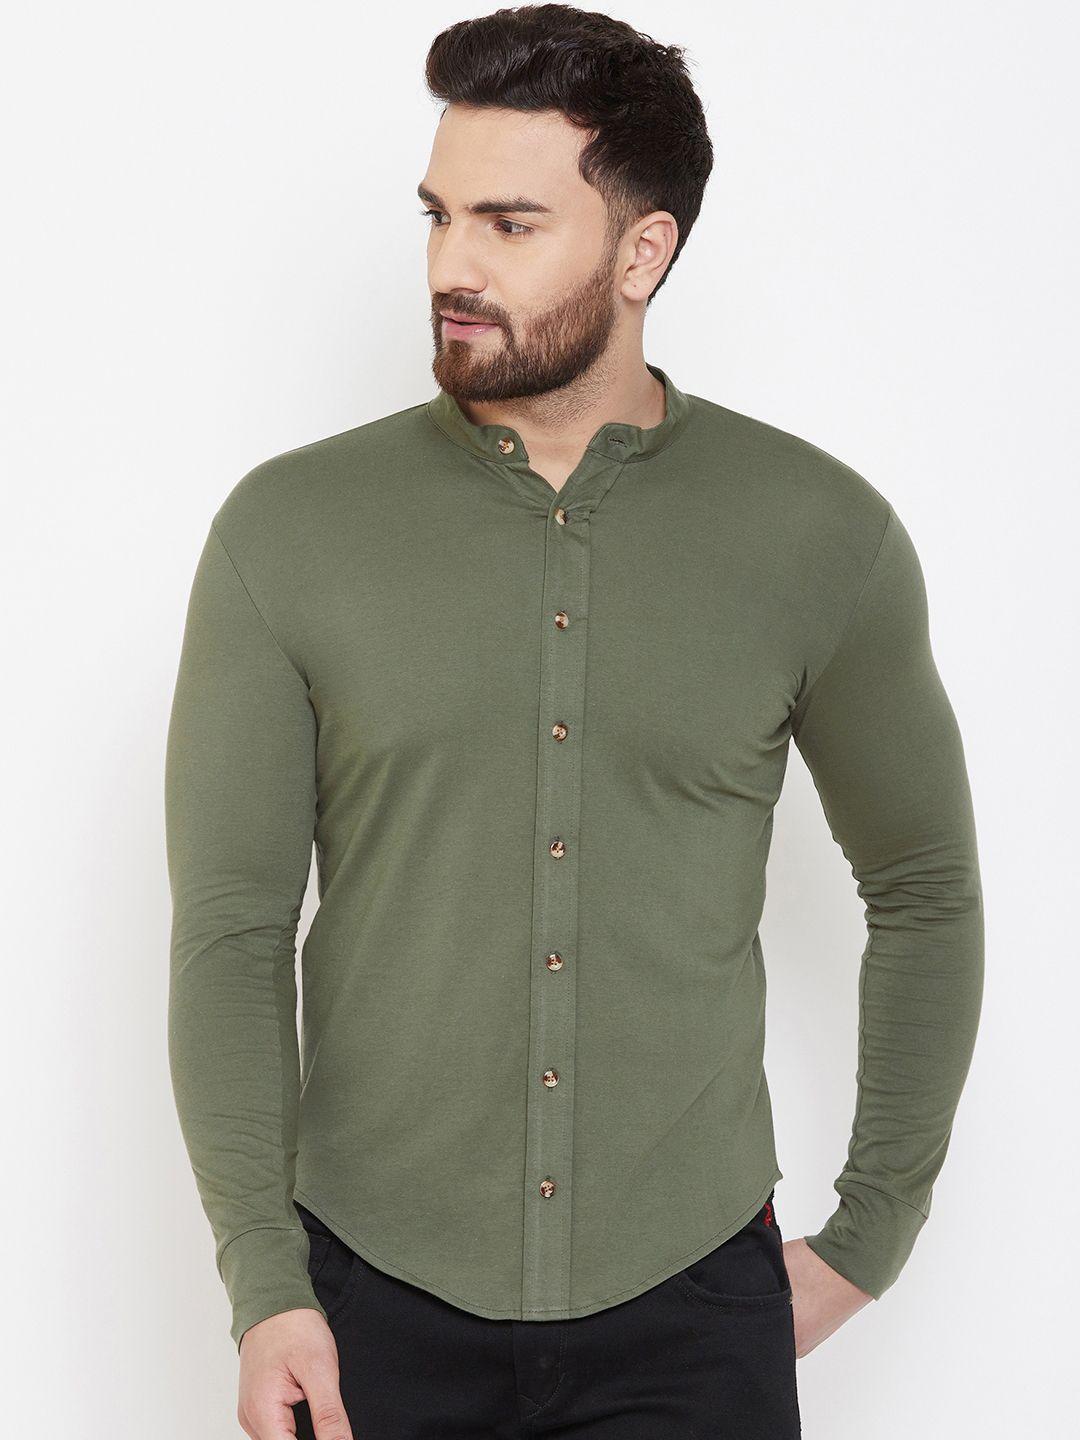 gespo men olive green slim fit solid casual shirt